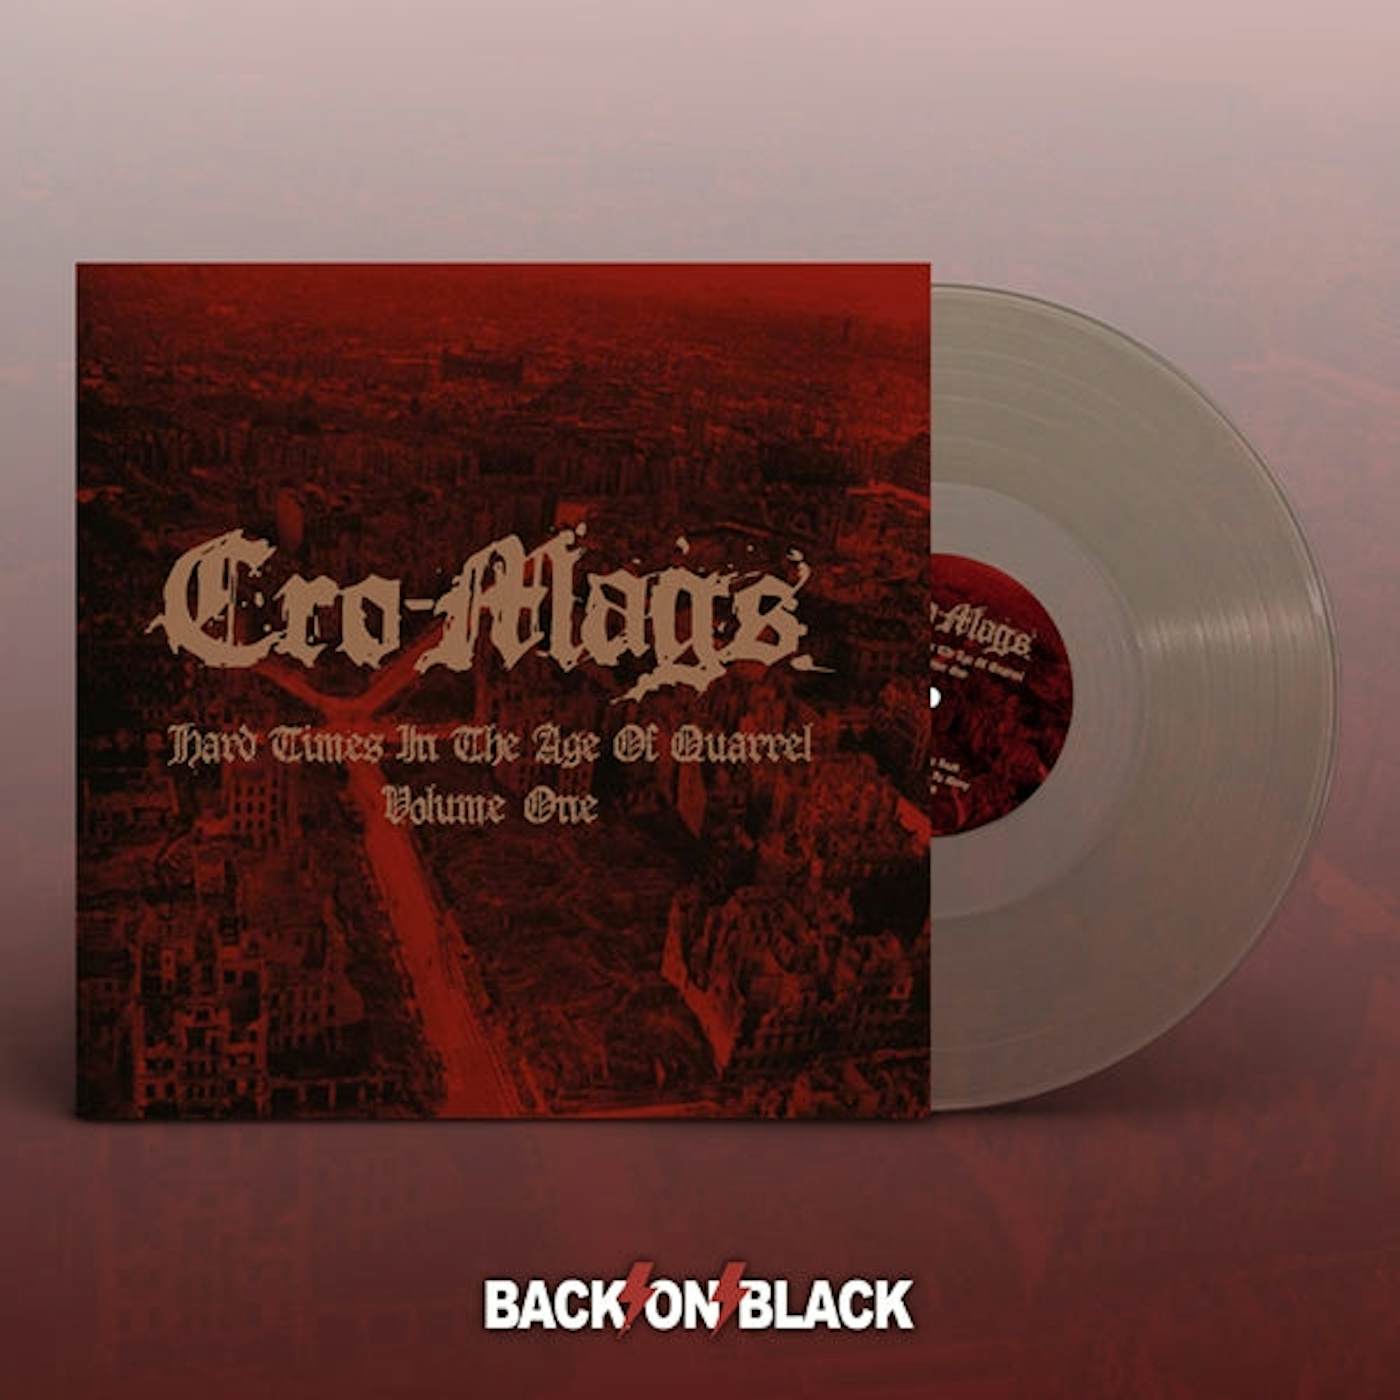 Cro-Mags LP - Hard Times In The Age Of Quarrel Vol 1 (Clear Vinyl)